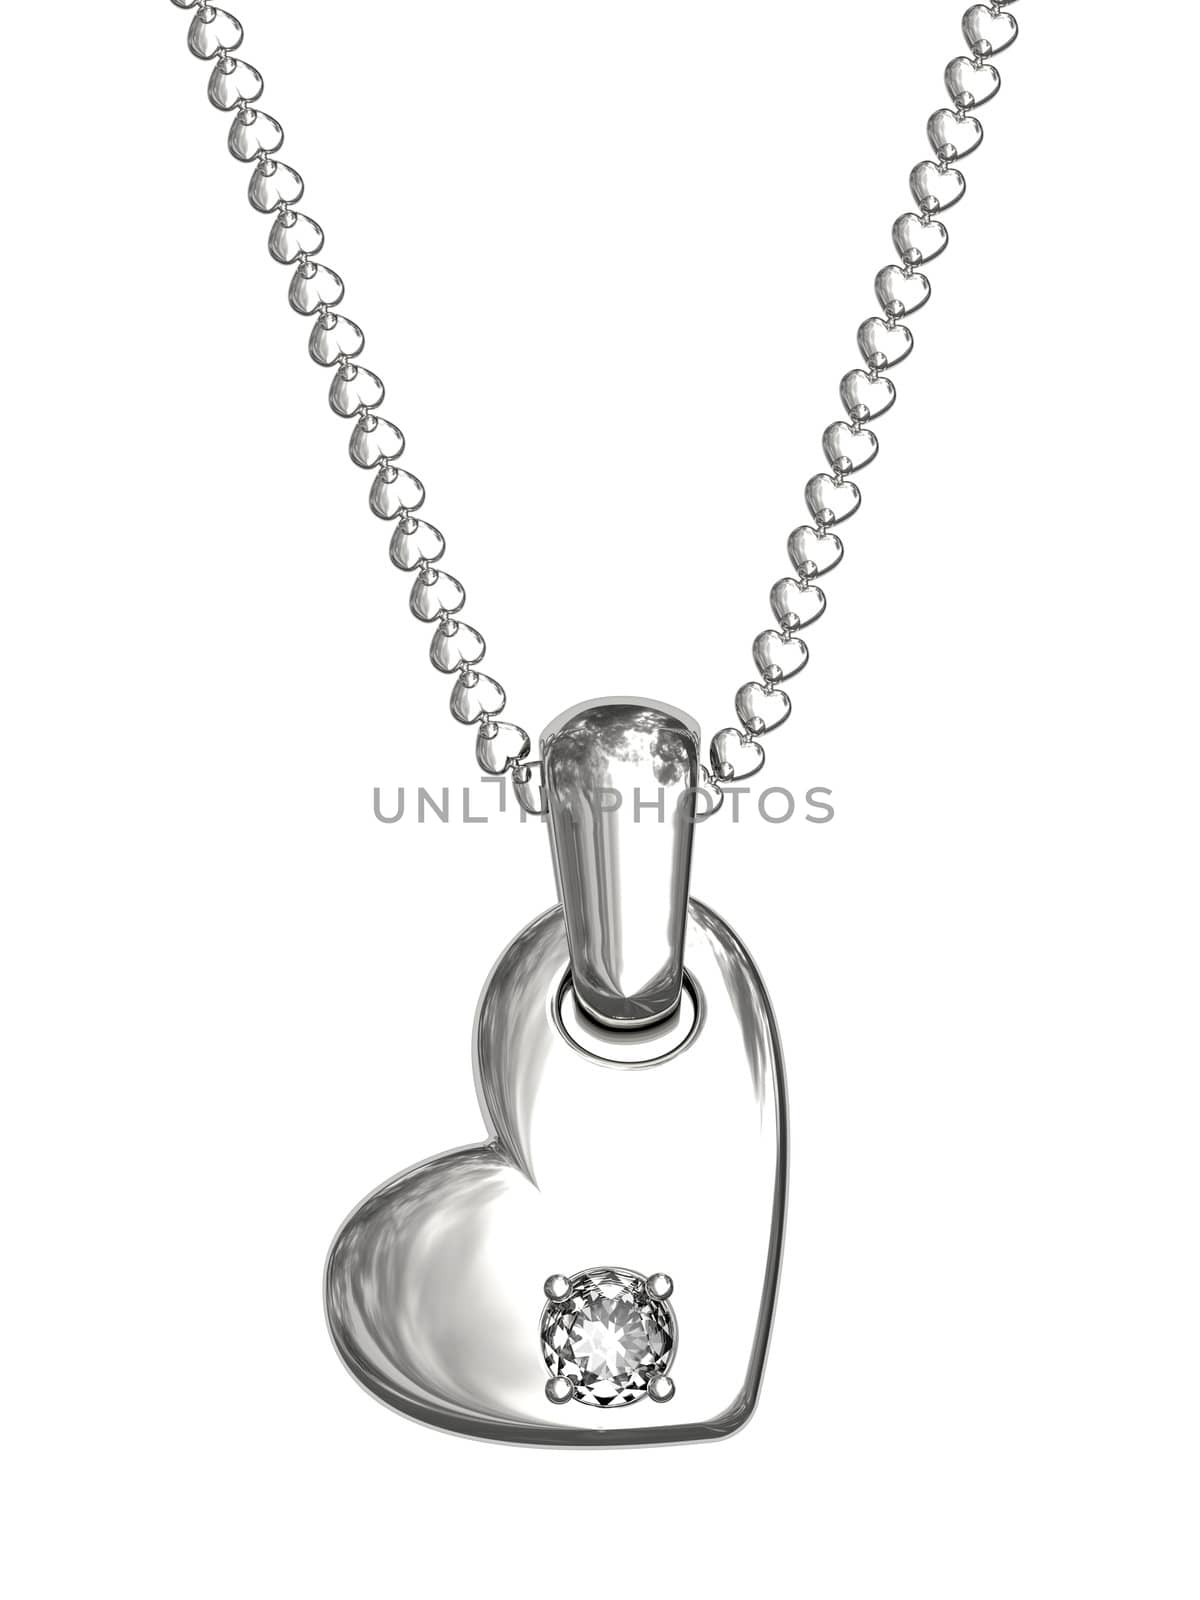 Platinum or silver pendant in shape of heart with diamond by oneo